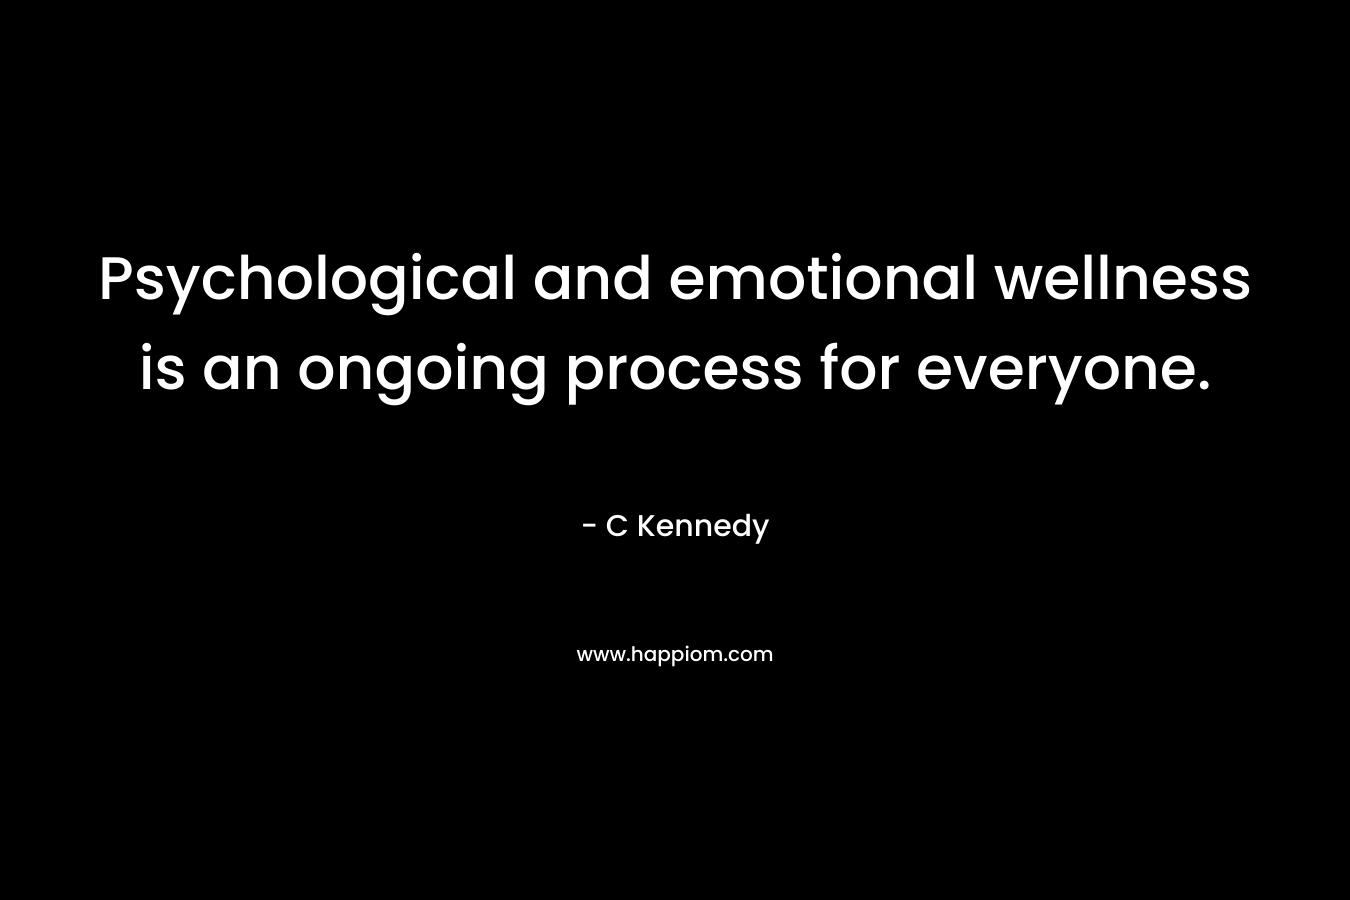 Psychological and emotional wellness is an ongoing process for everyone. – C Kennedy